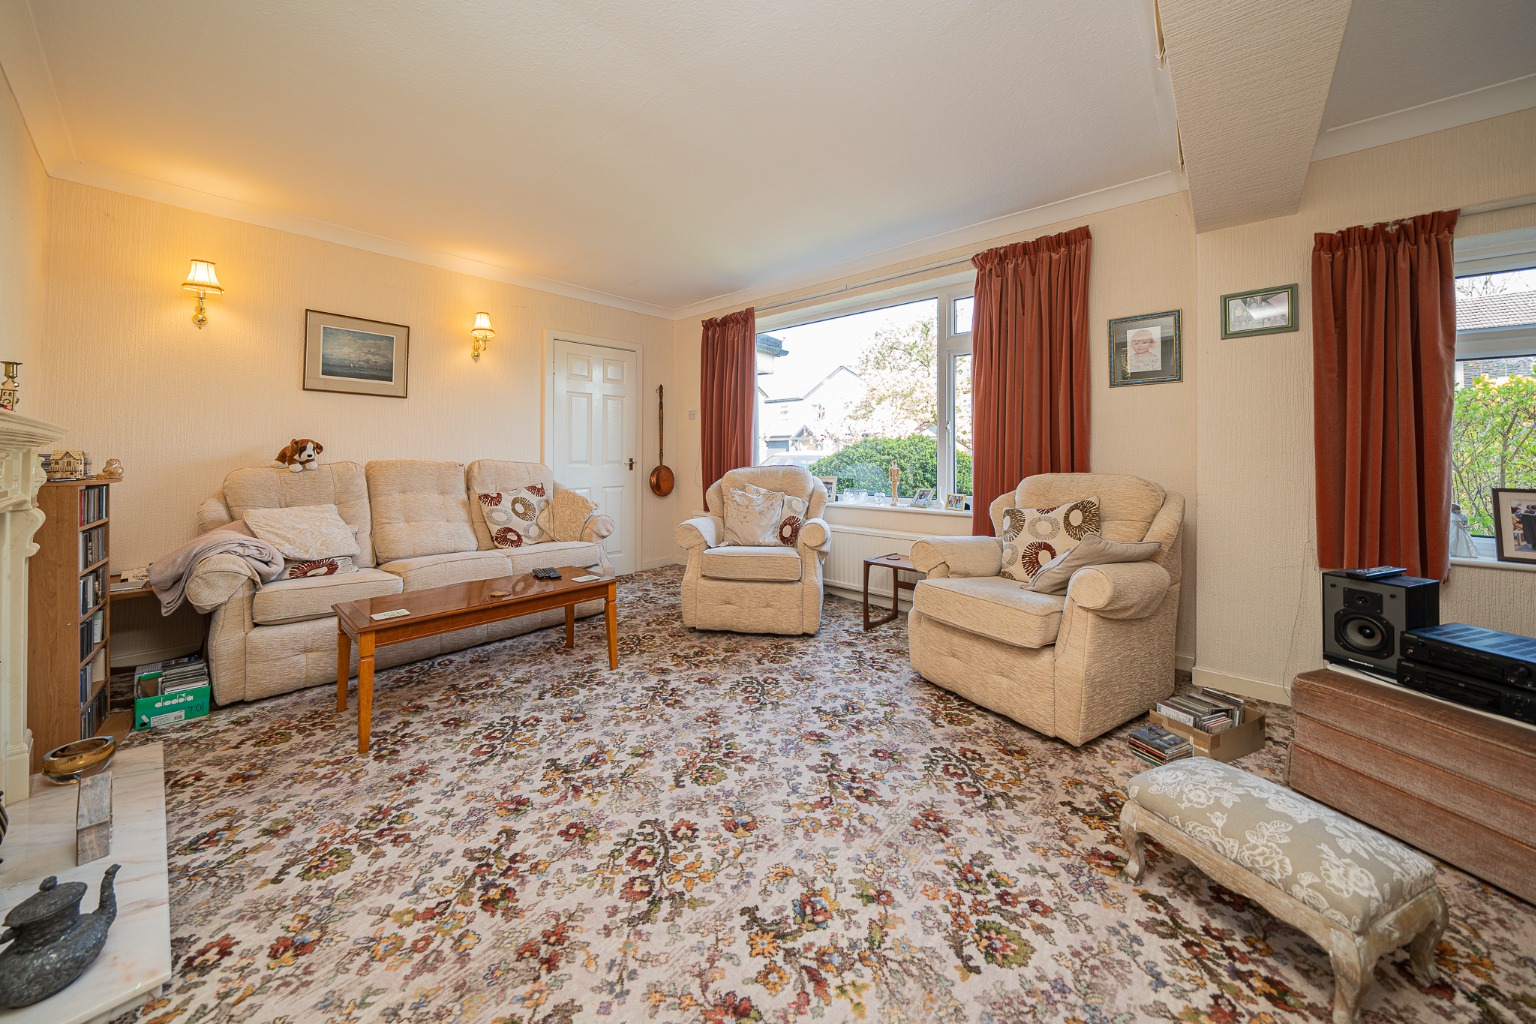 Images for Thornway, Bramhall, Cheshire, SK7 2AH